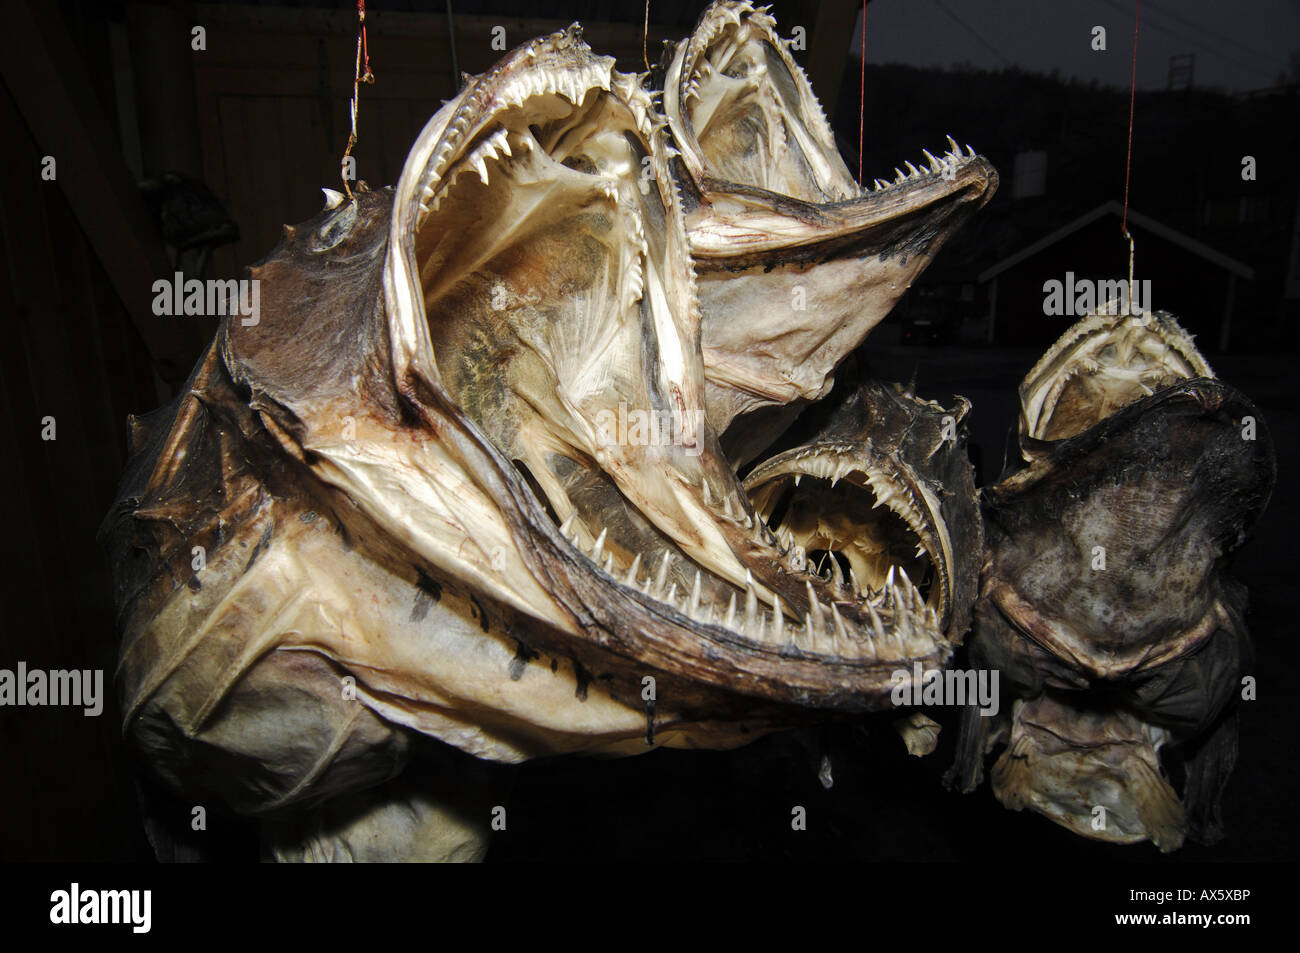 Dried monkfish, souvenir from Norway, Europe Stock Photo